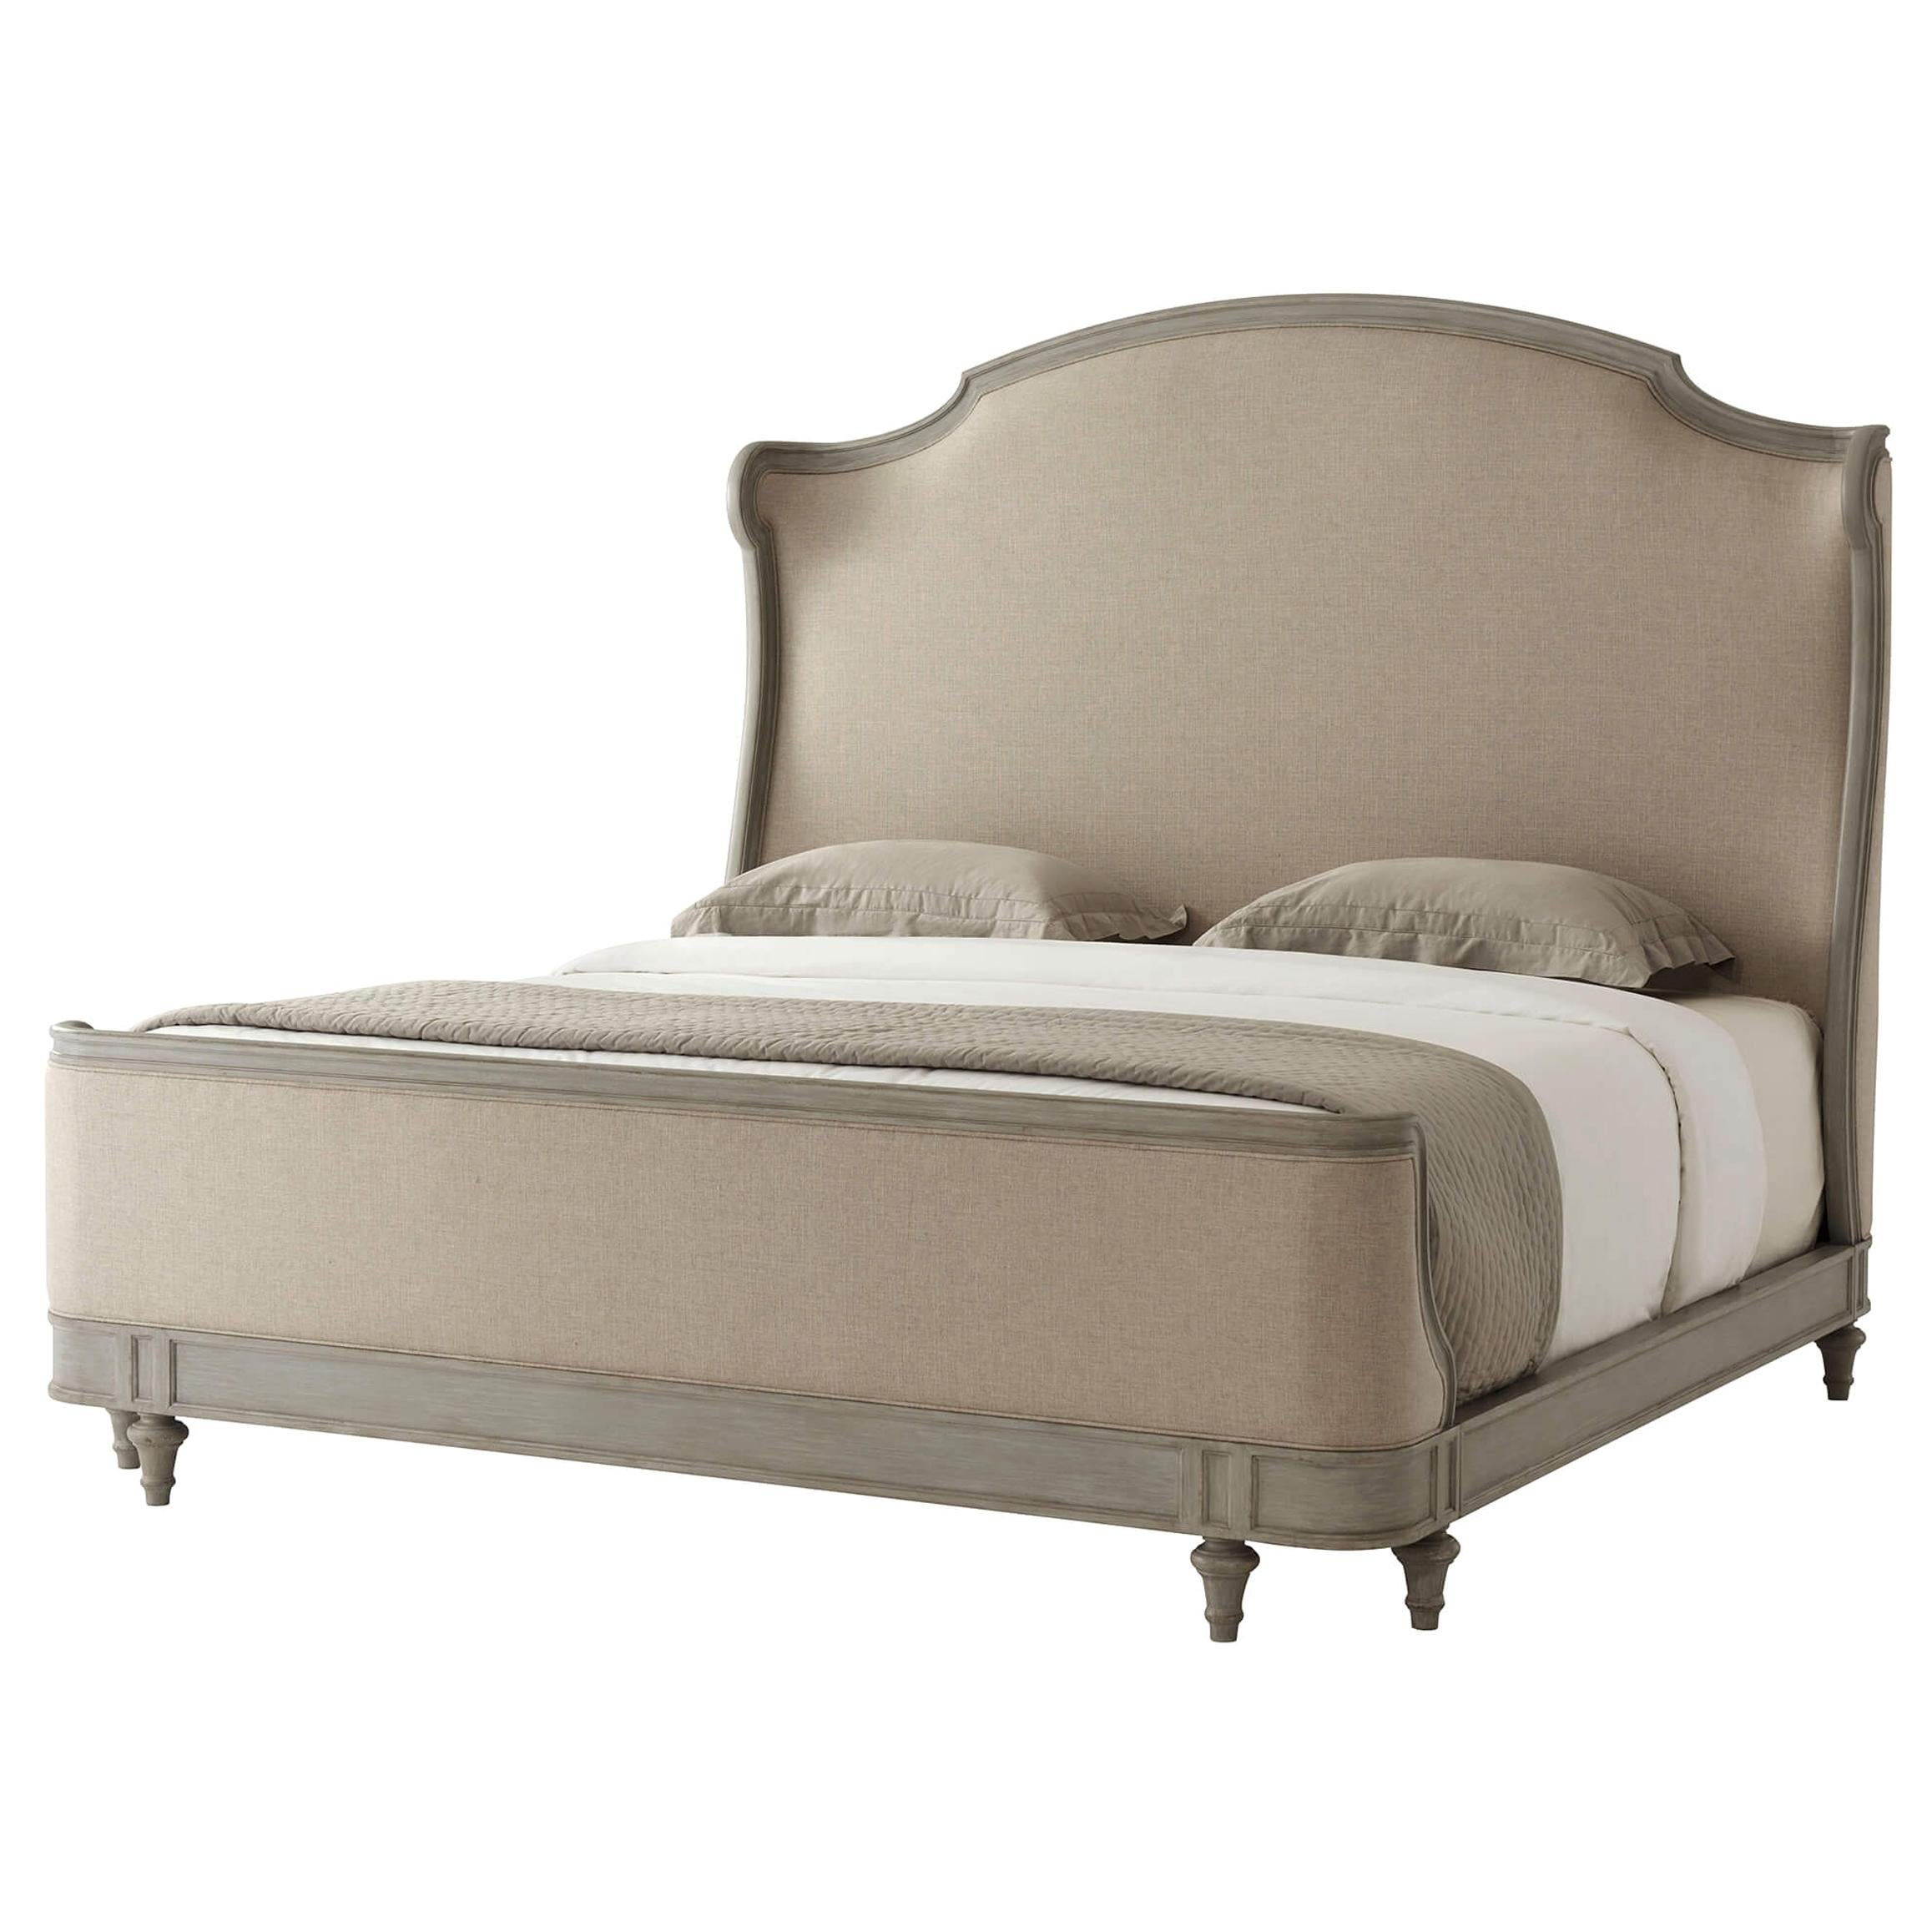 Provincial Painted King Size Bed